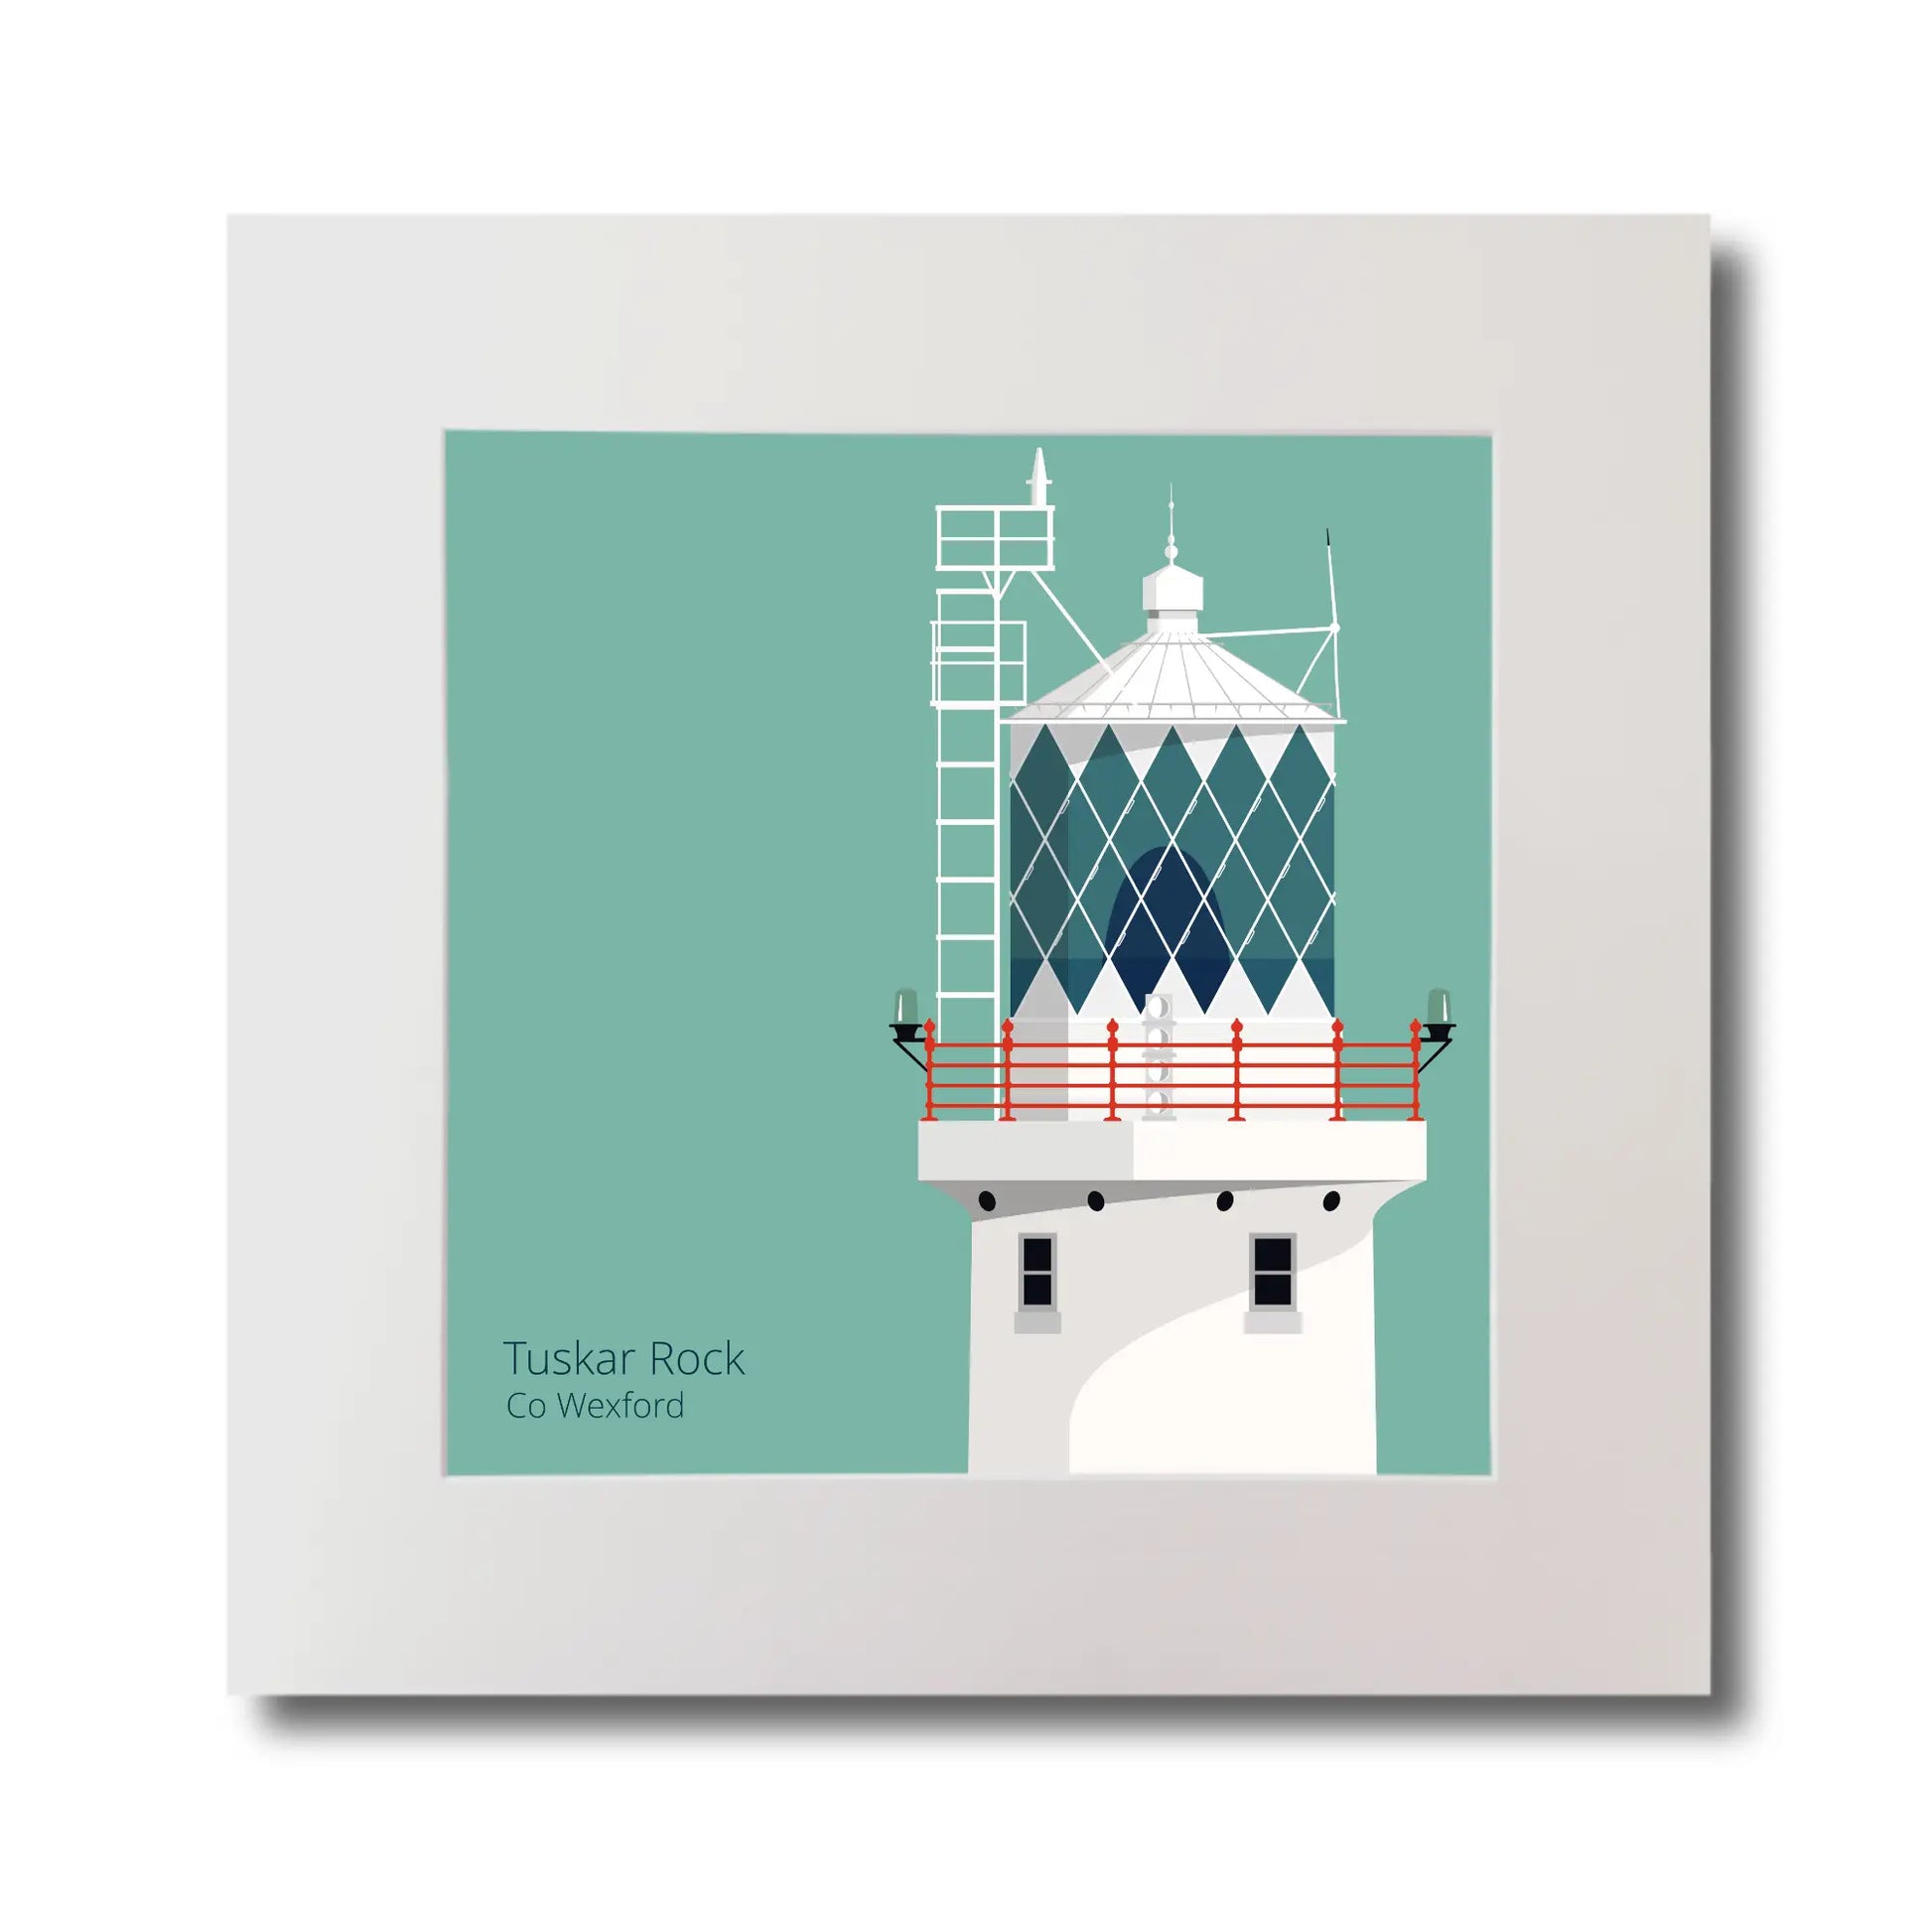 Illustration of Tuskar Rock lighthouse on an ocean green background, mounted and measuring 30x30cm.